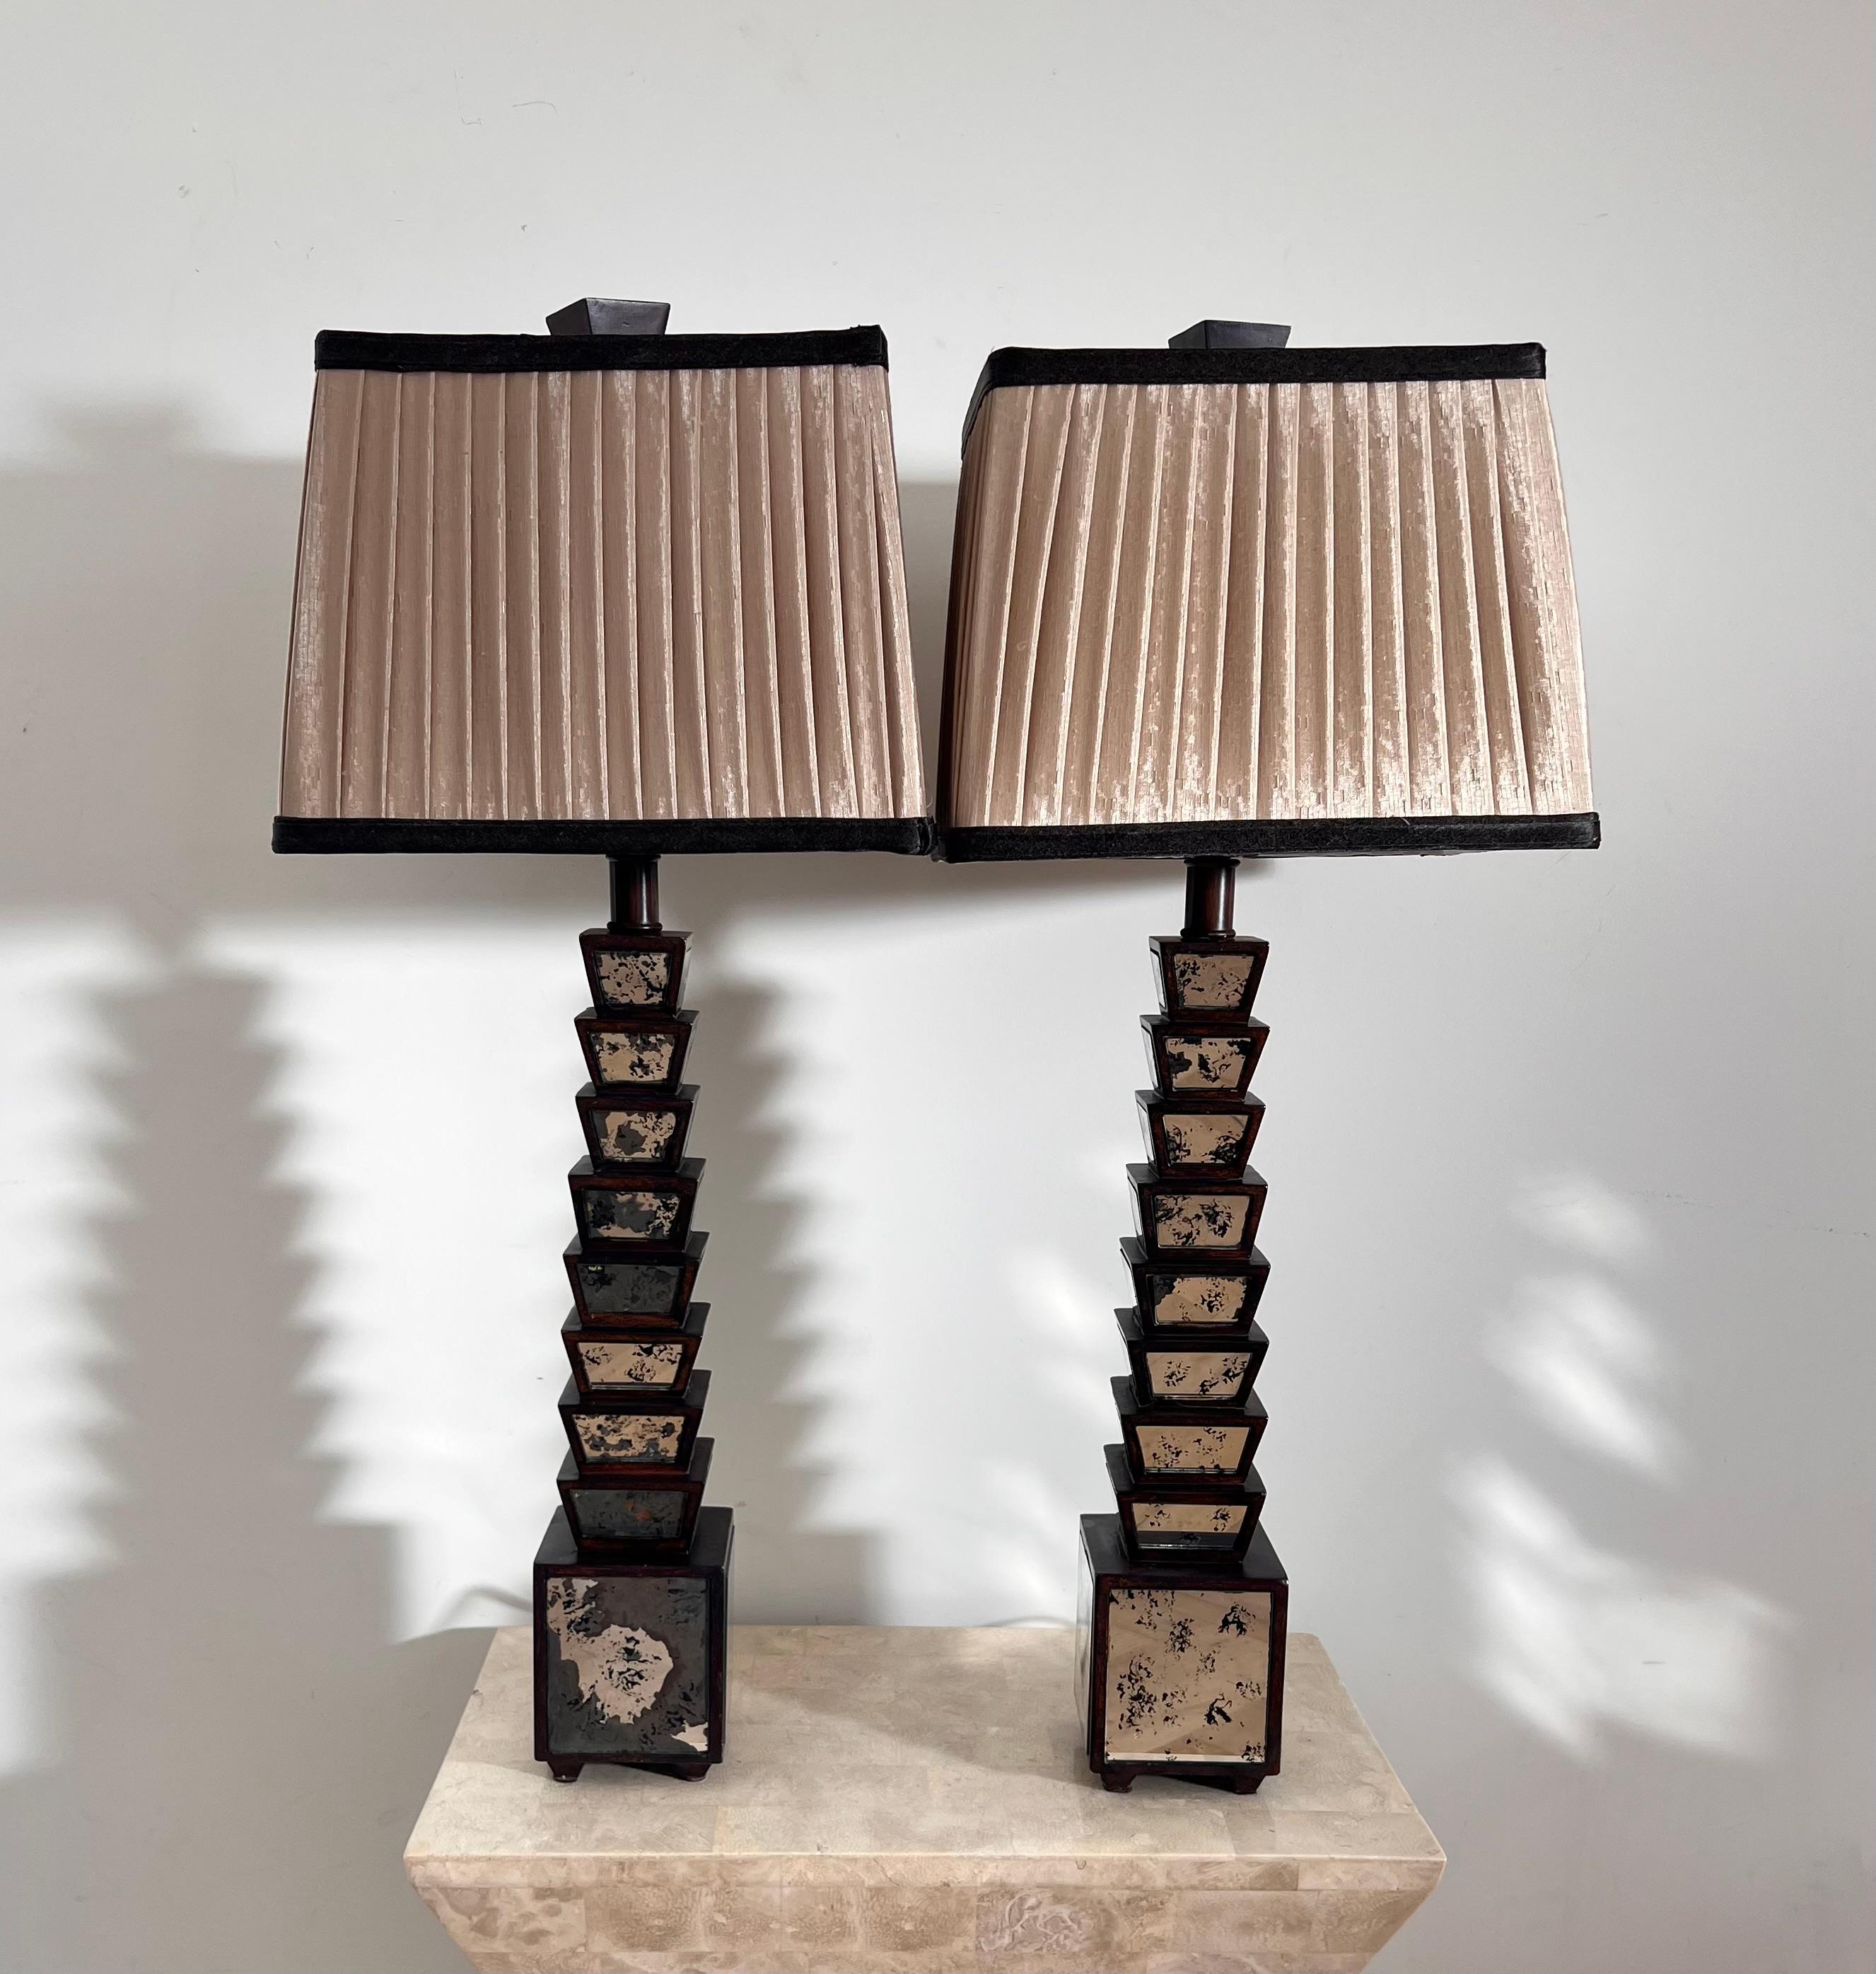 Art Deco Pair of Deco Stacked Wood and Mirror Table Lamps, Early 20th Century